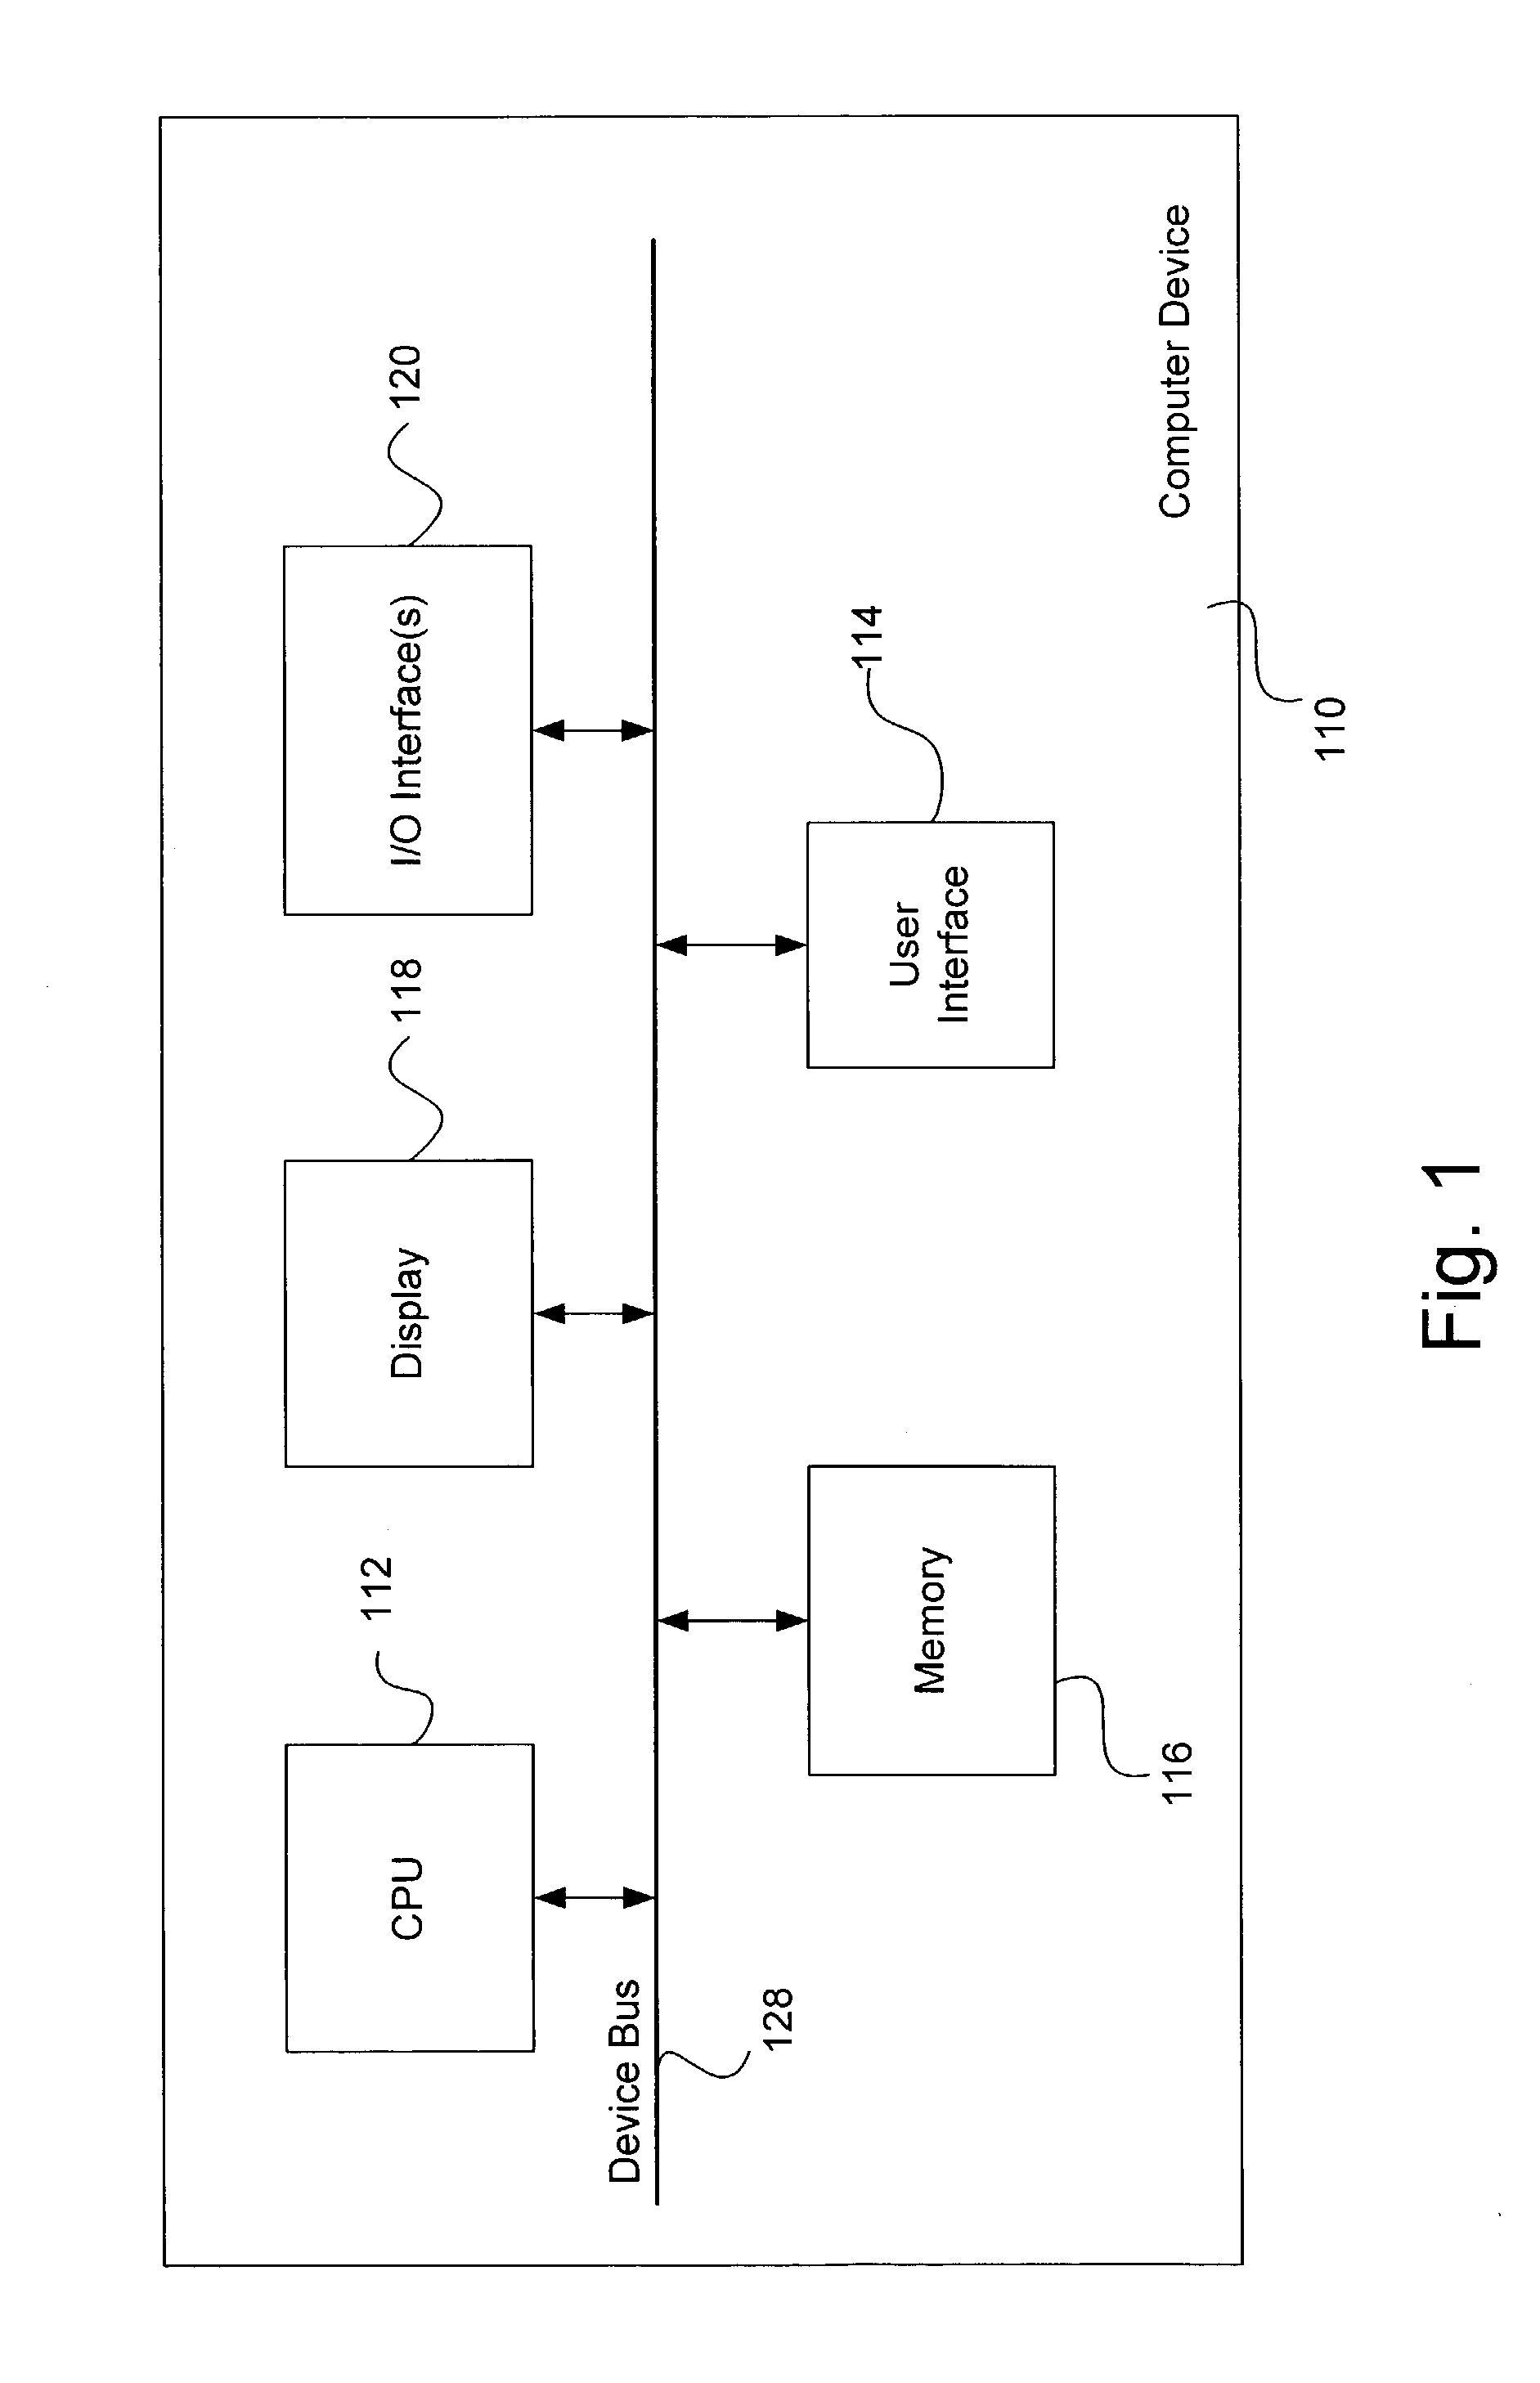 System and method for effectively extracting facial feature information